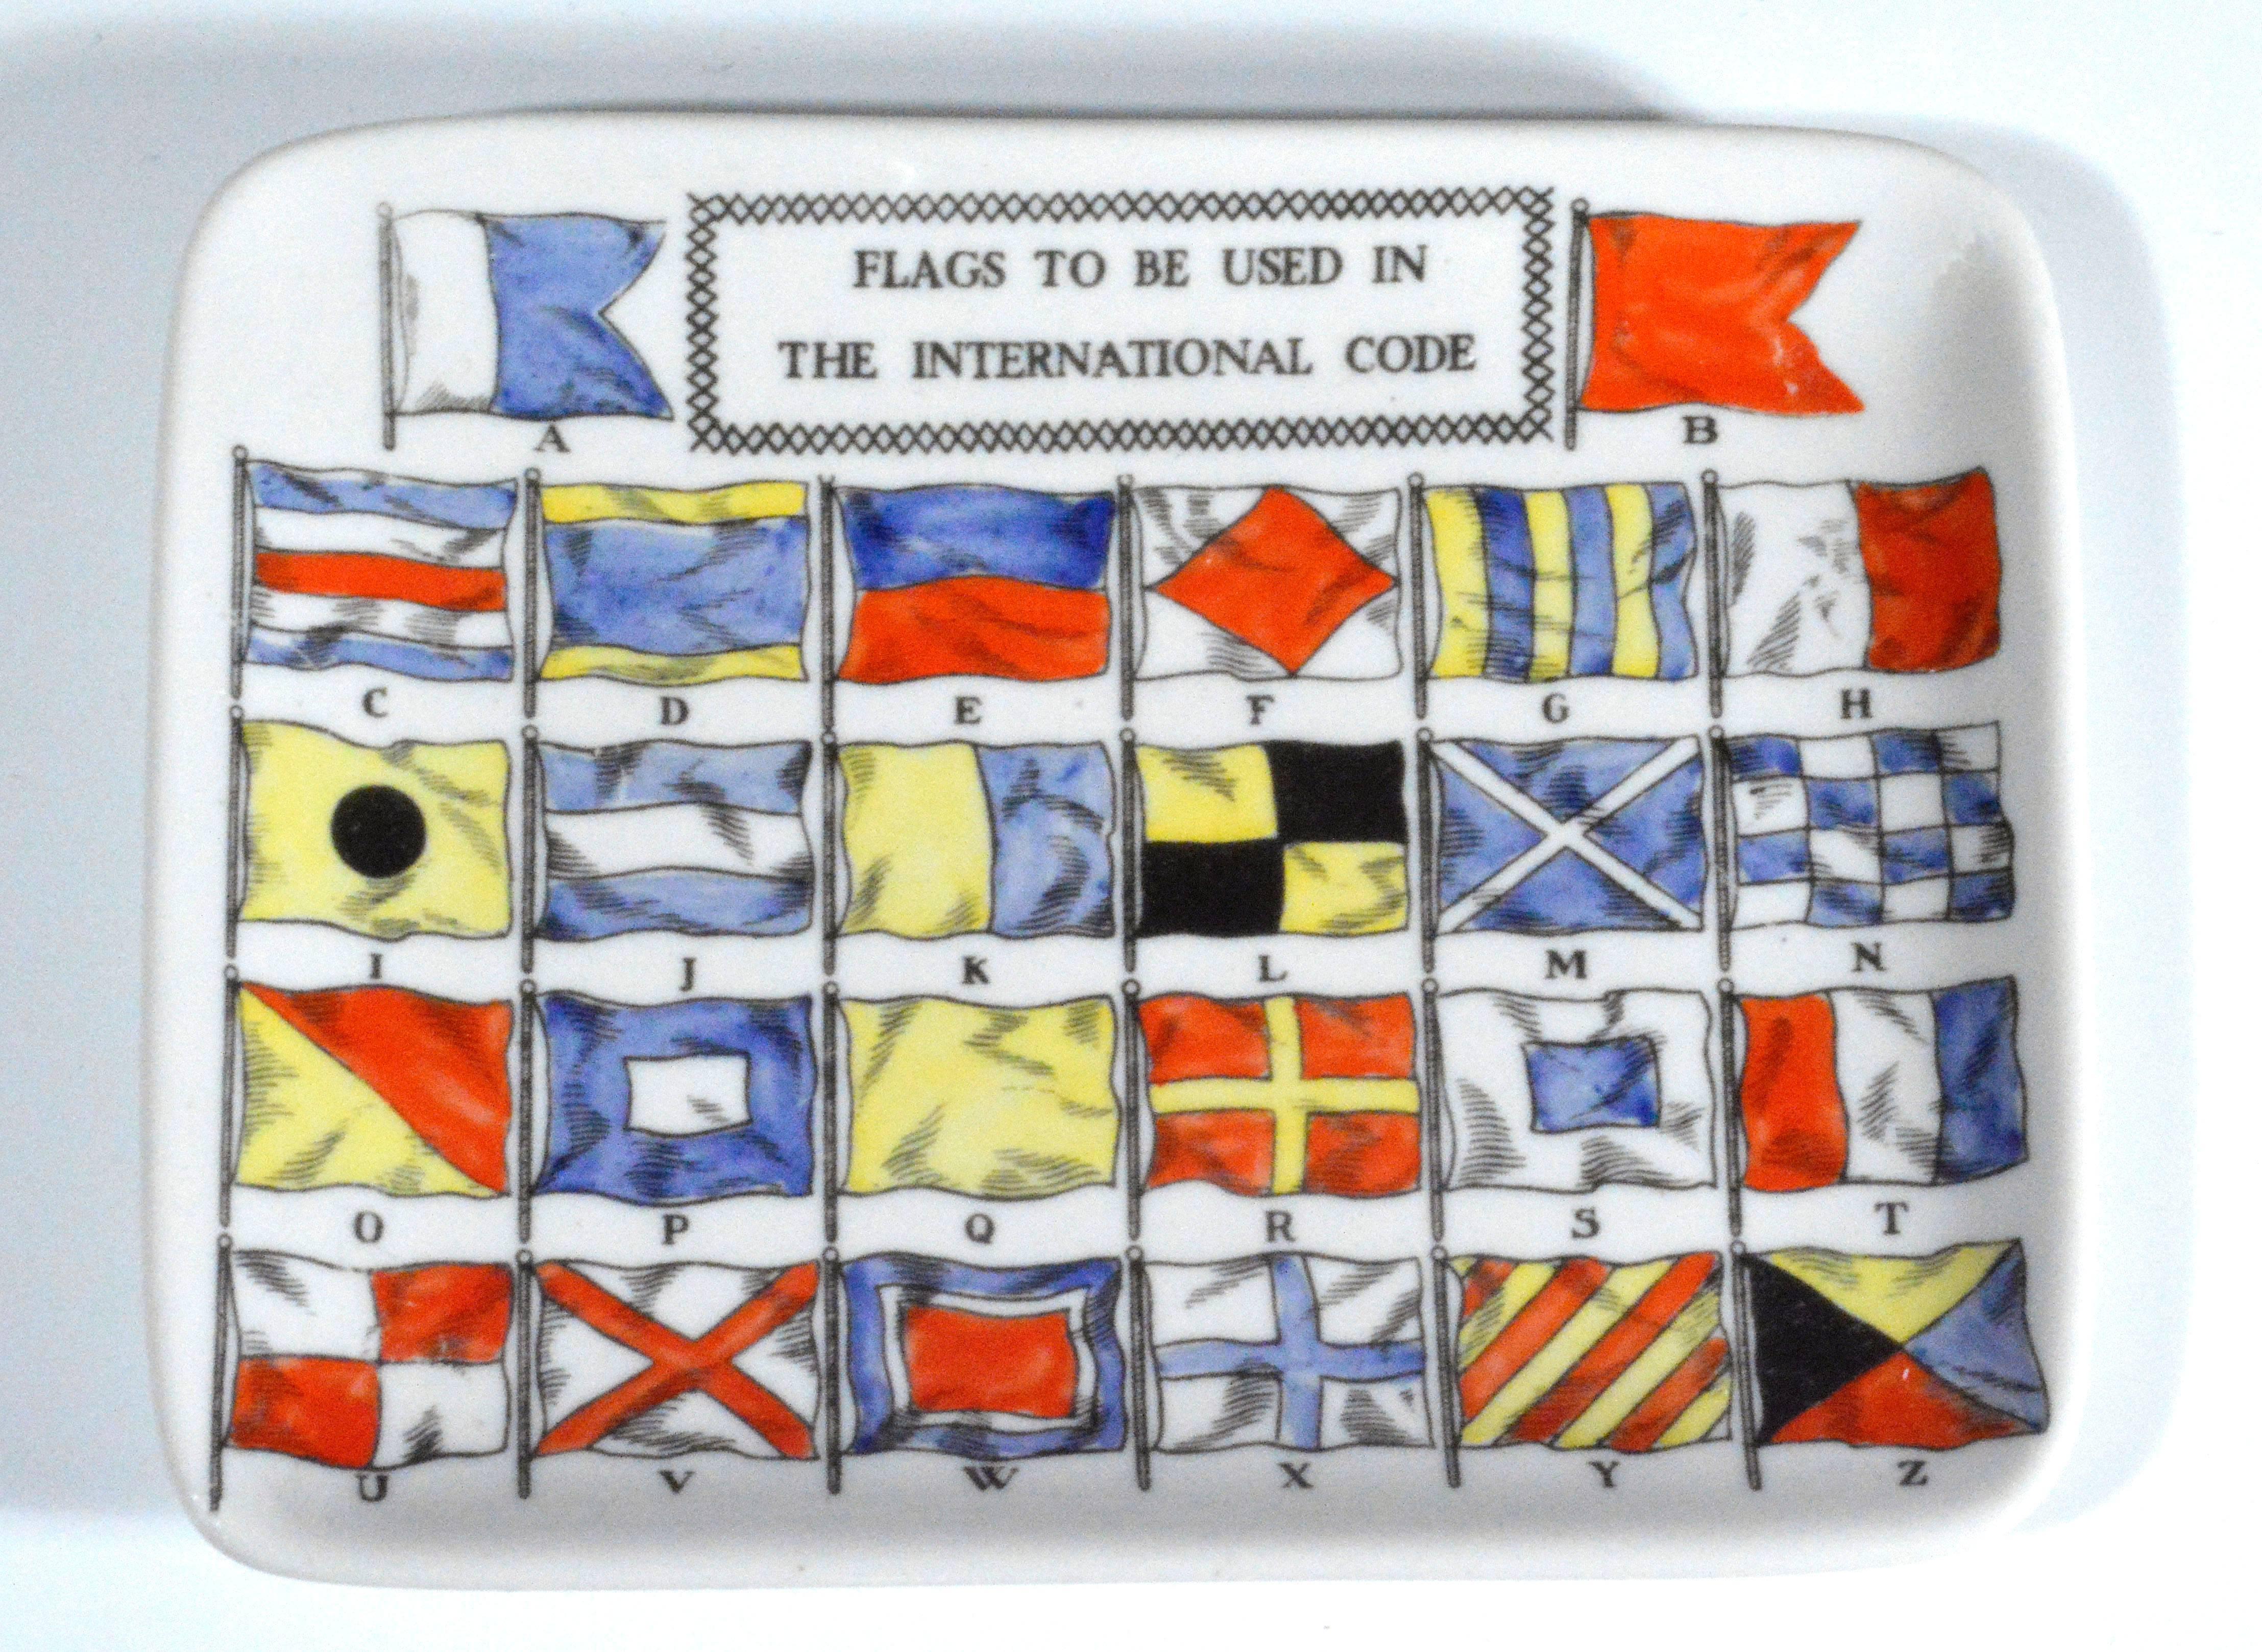  Piero Fornasetti dish from the 1960s is decorated with code flags- the flags are signal flags with their corresponding letter equivalent from A-Z.